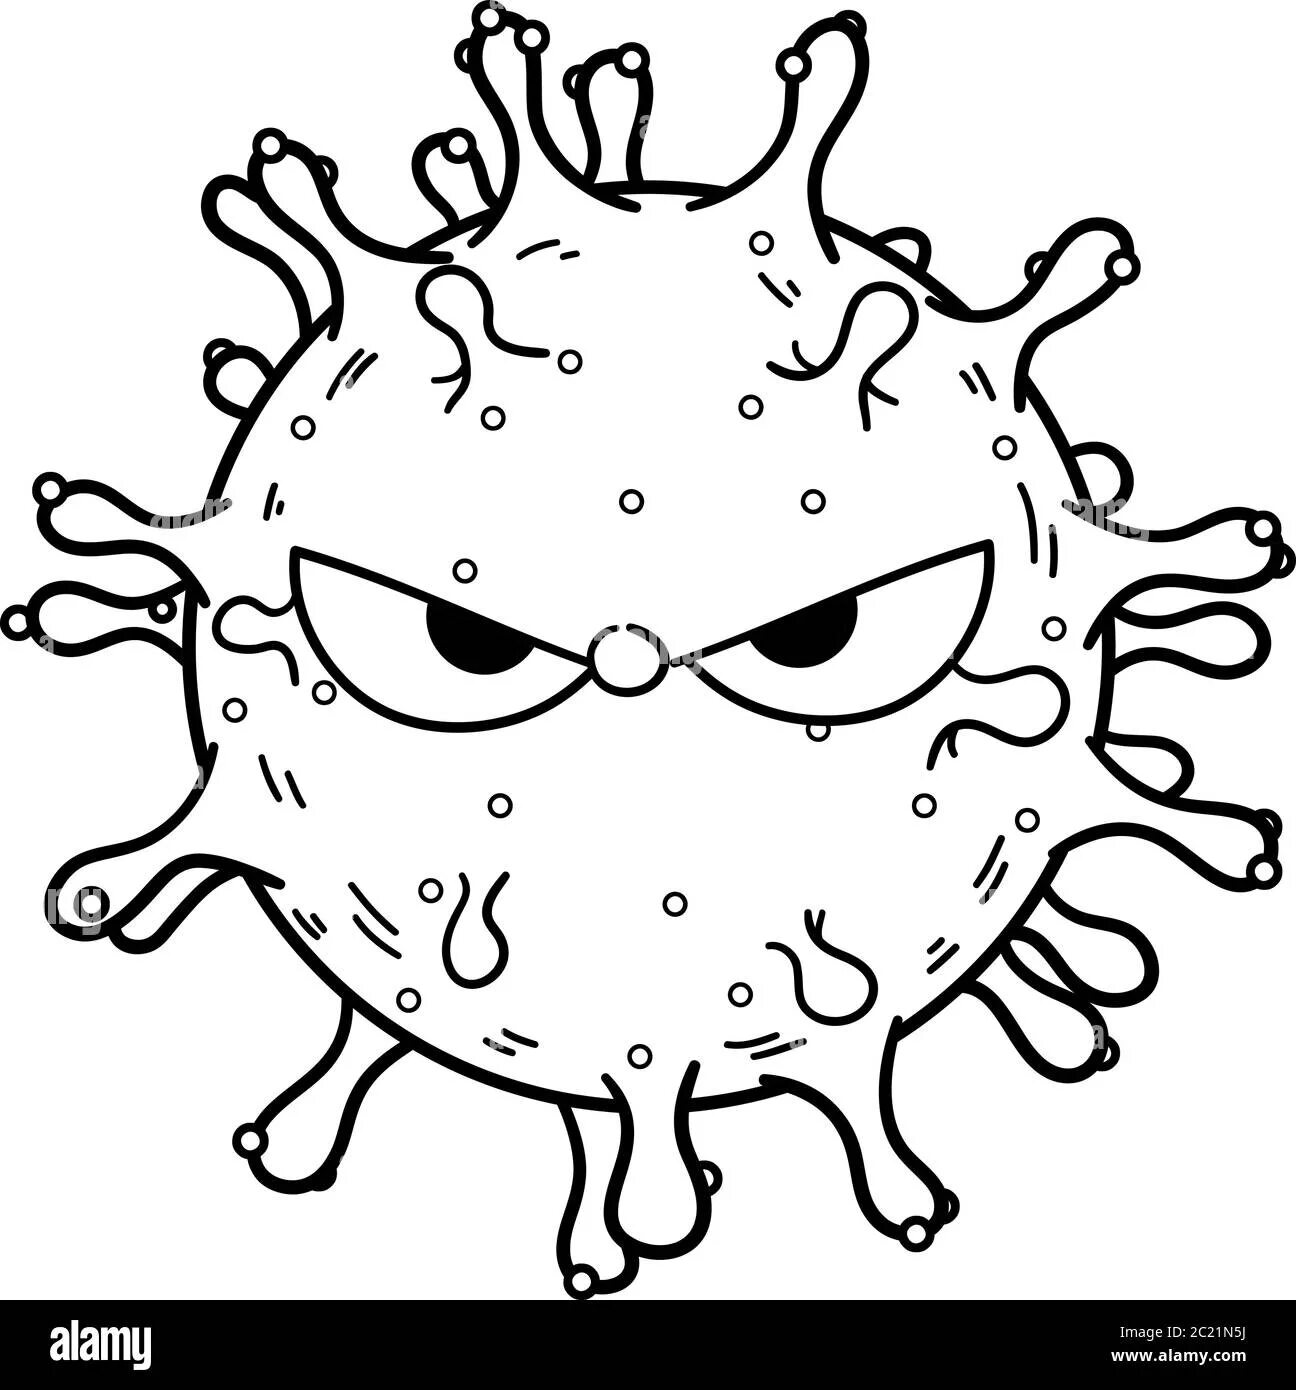 Viruses and germs for kids #6